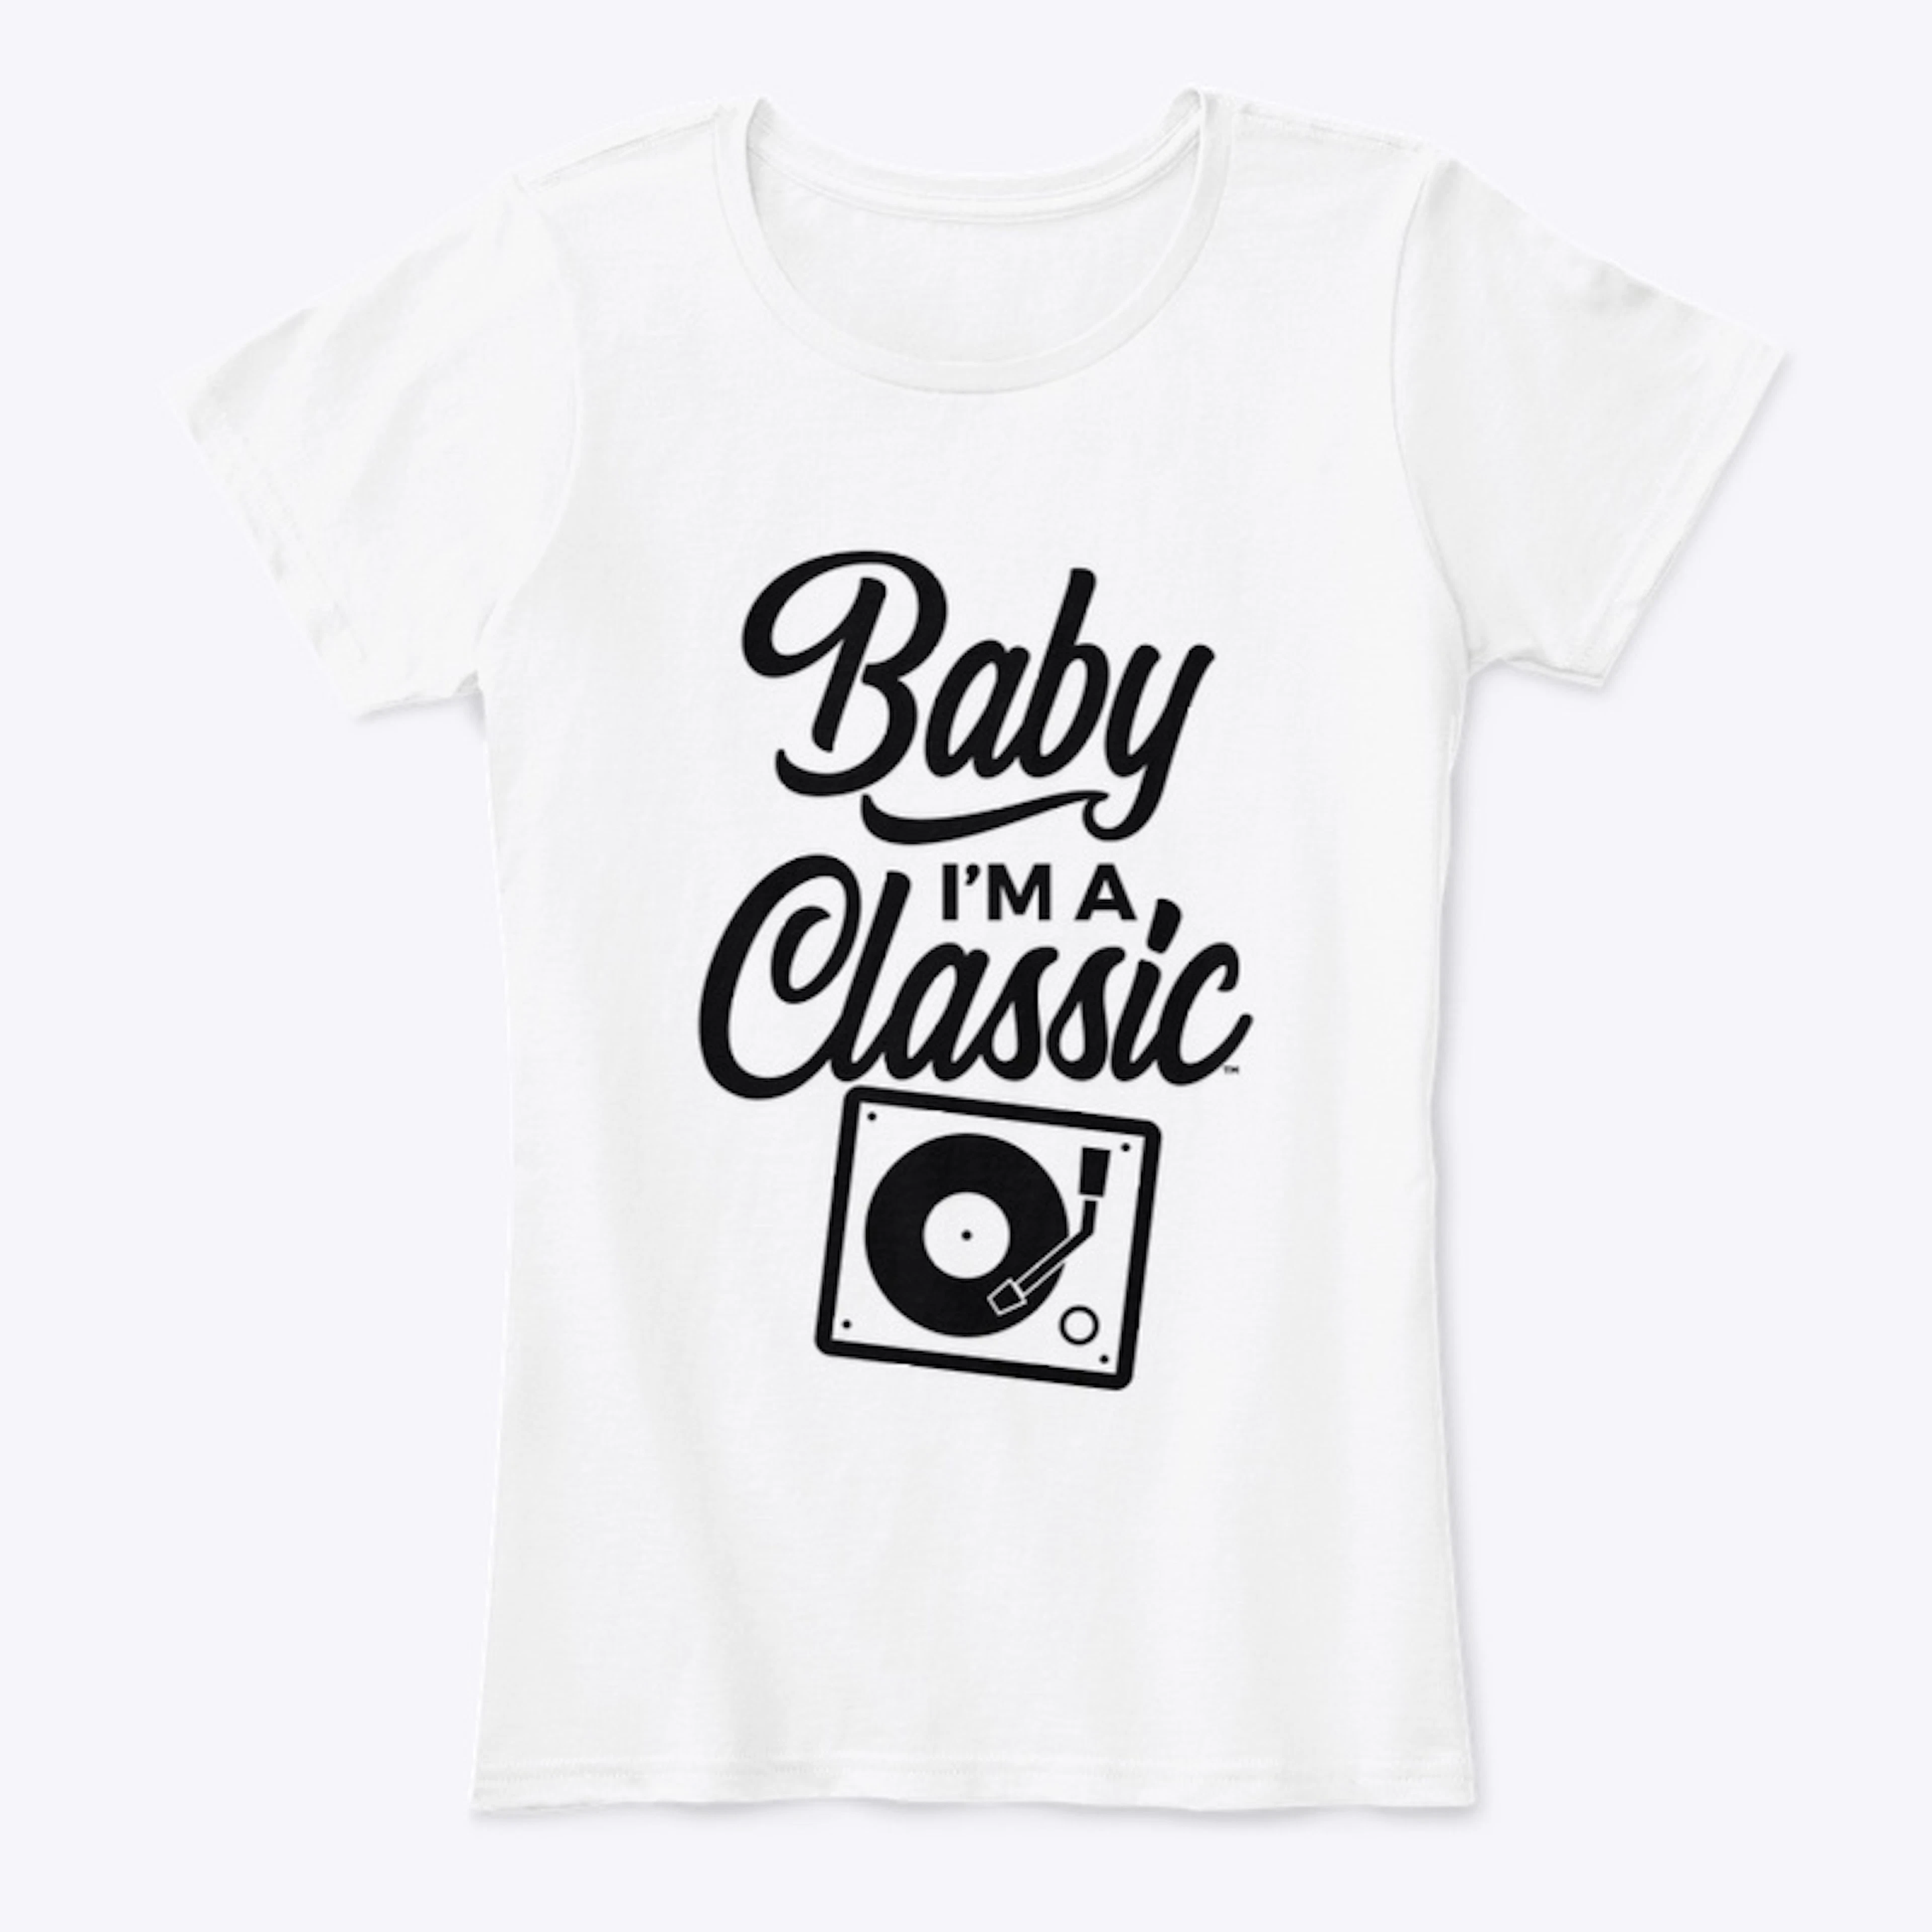 Baby I'm A Classic™ Collection Blk Fnt